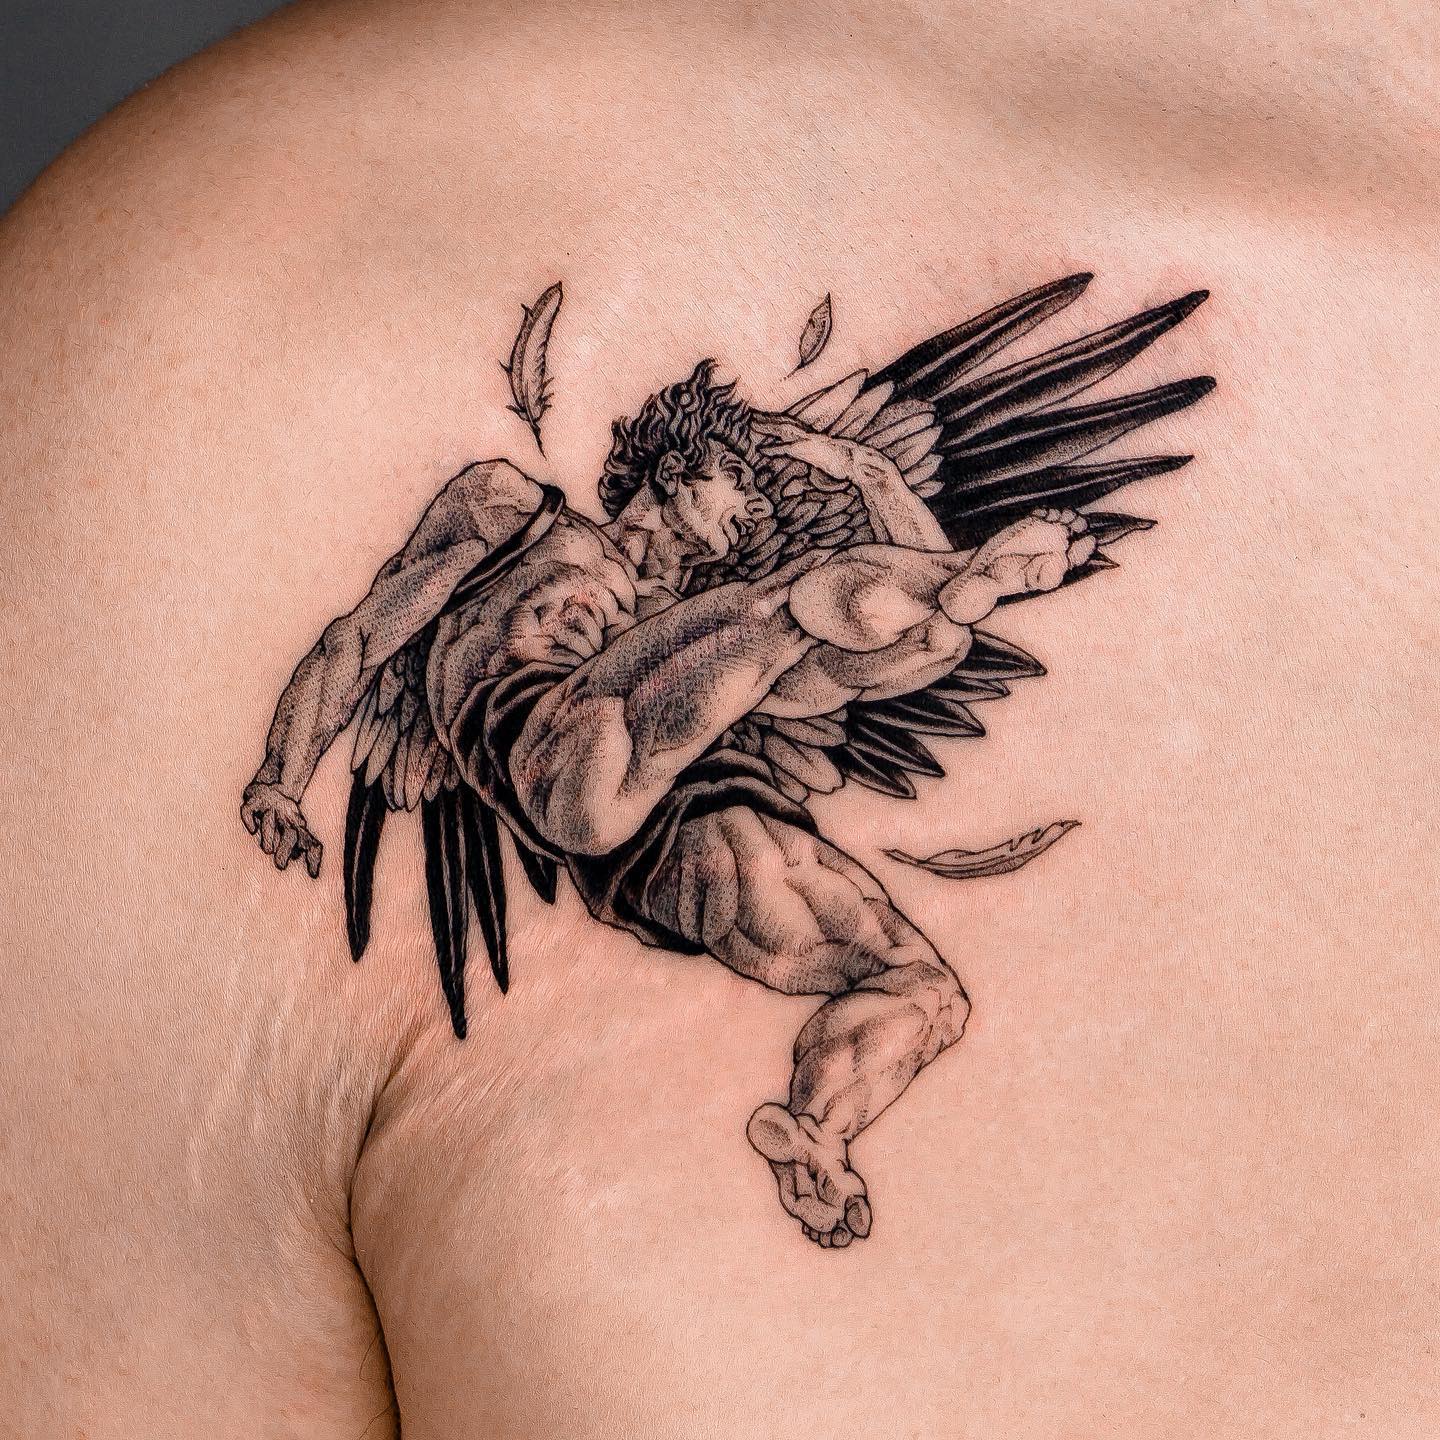 Icarus Tattoo Symbolism Meanings  More